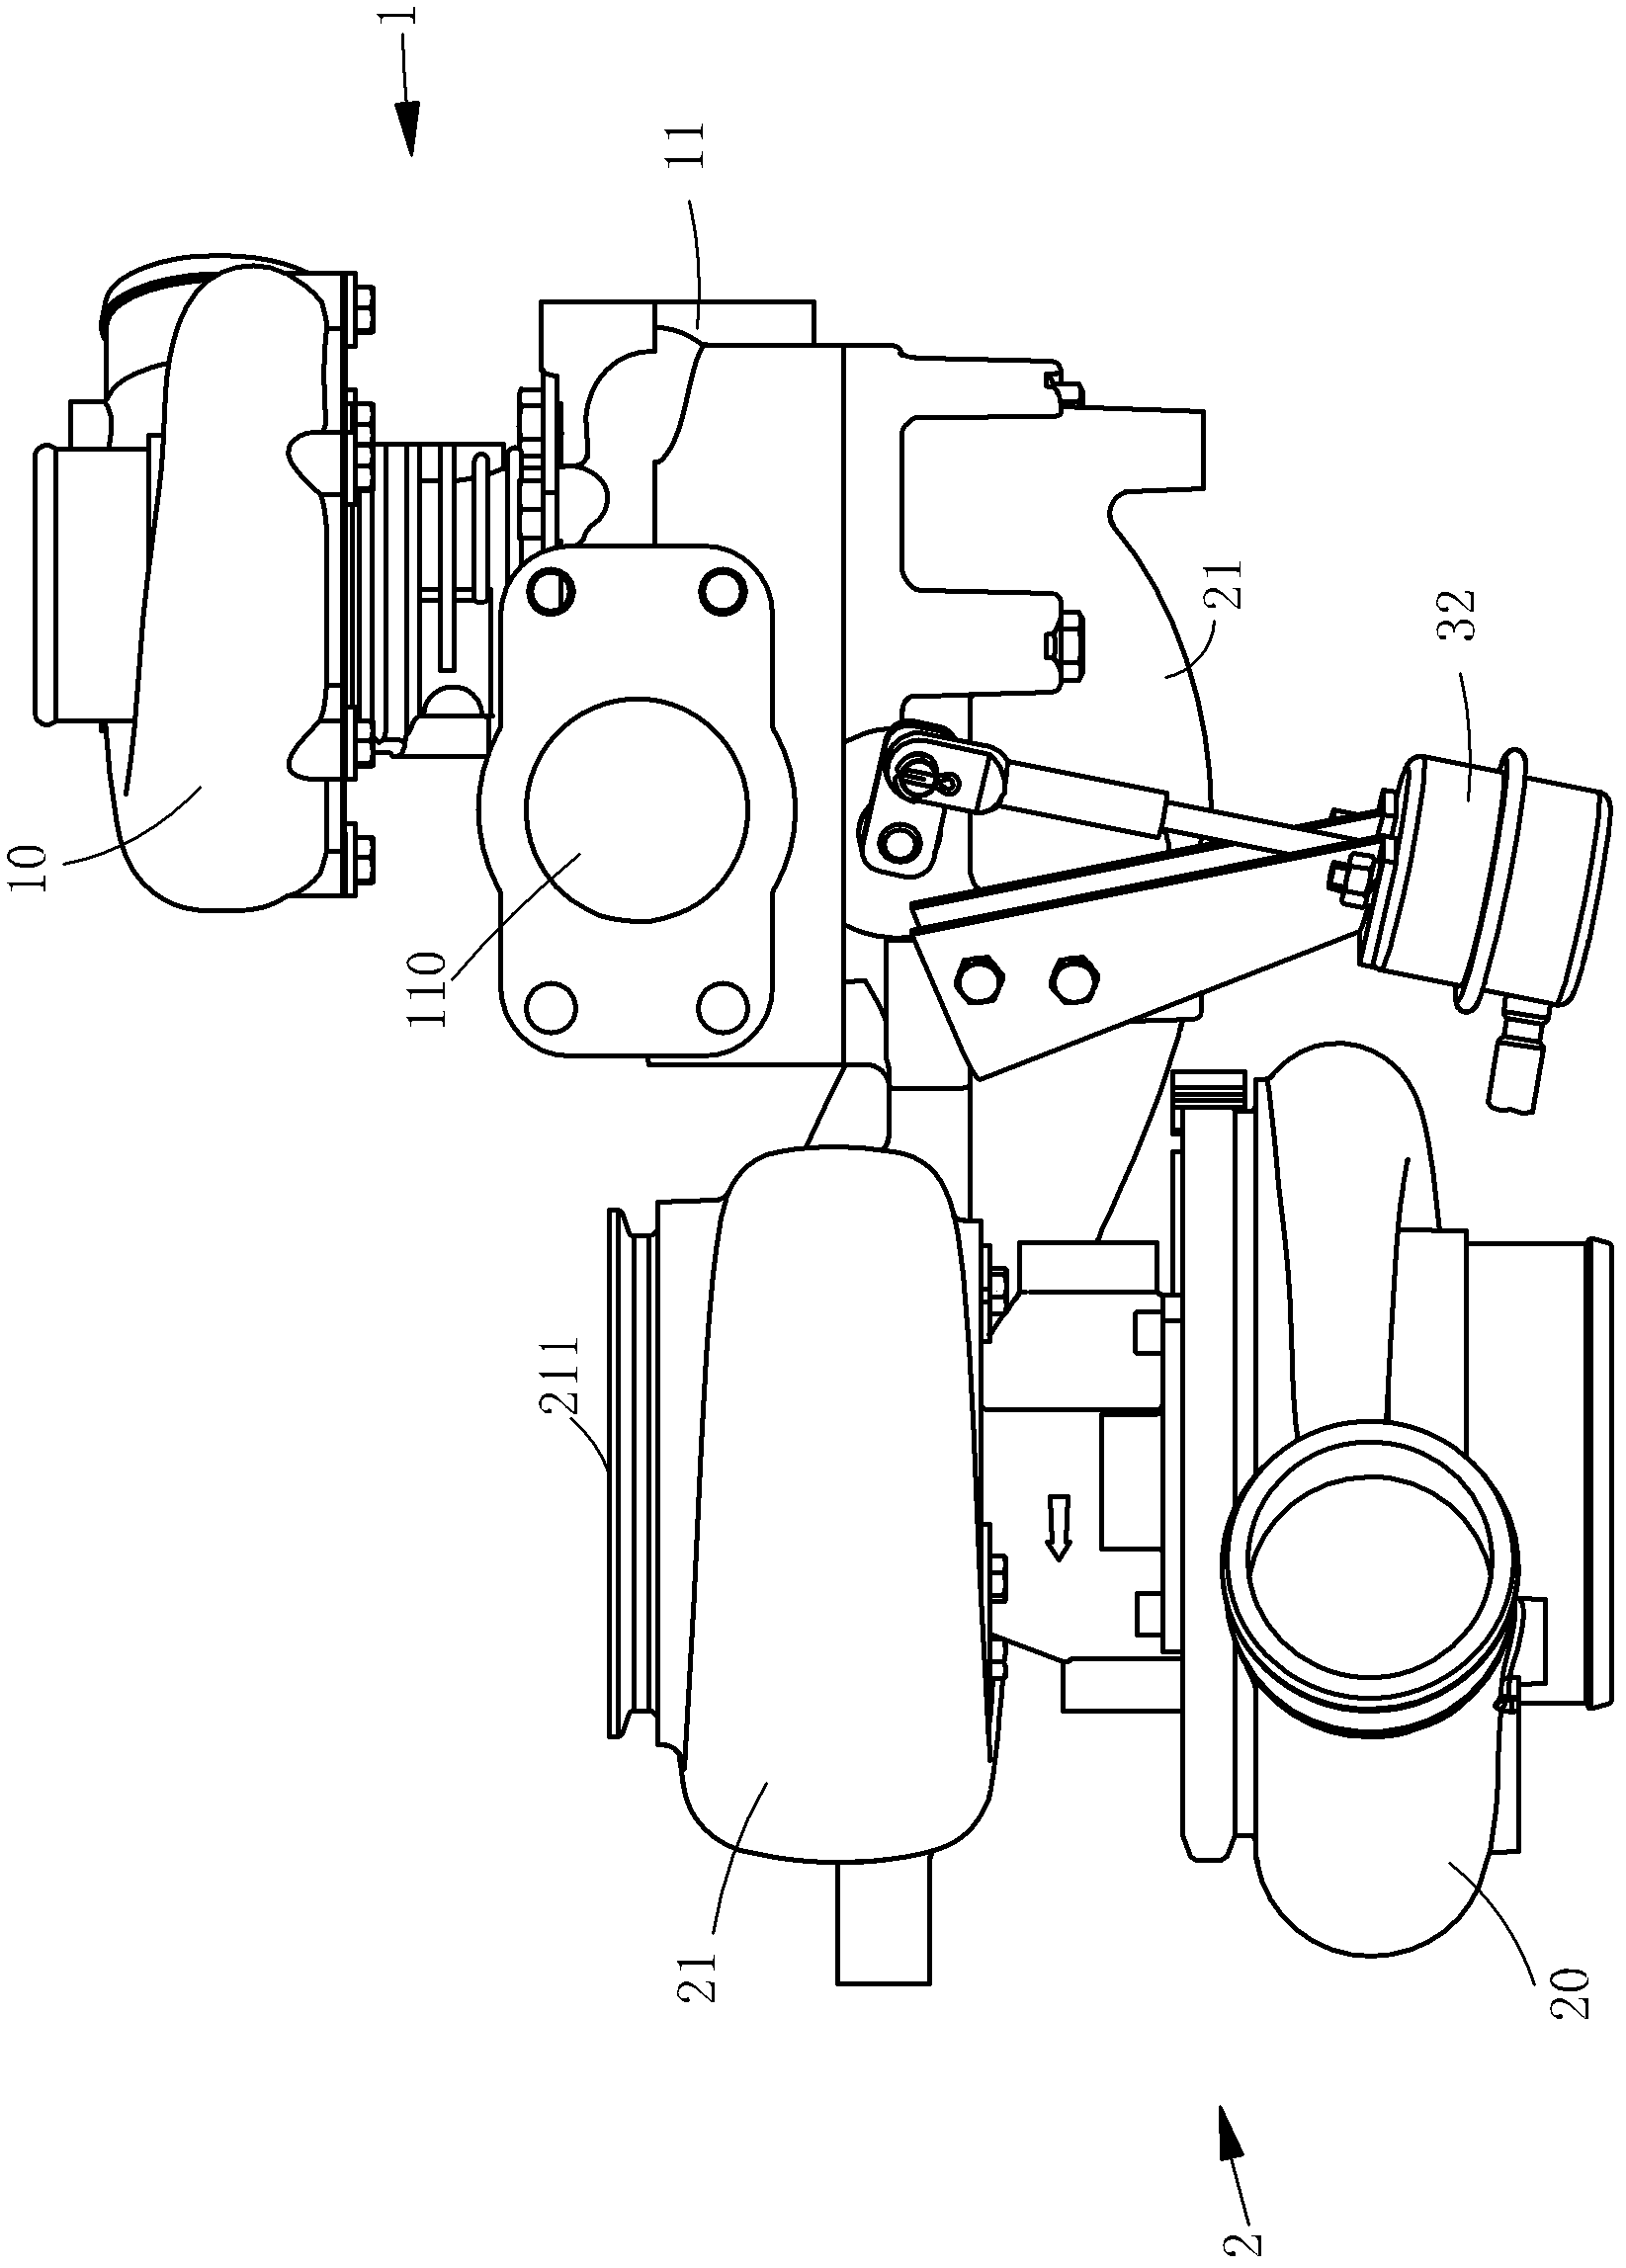 Turbocharger with two-stage supercharging function